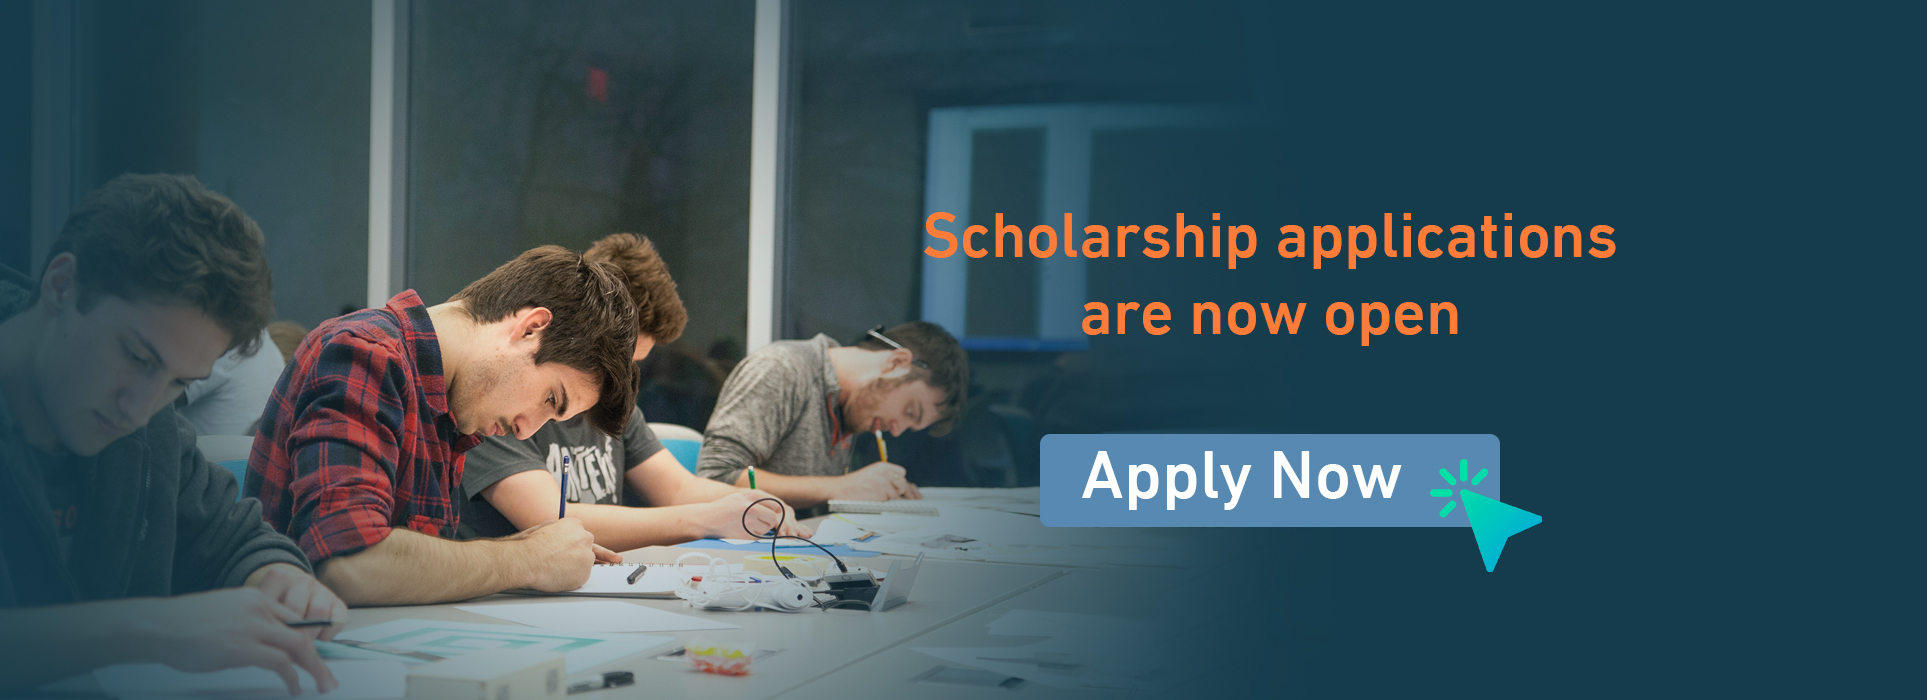 Scholarship applications are now open